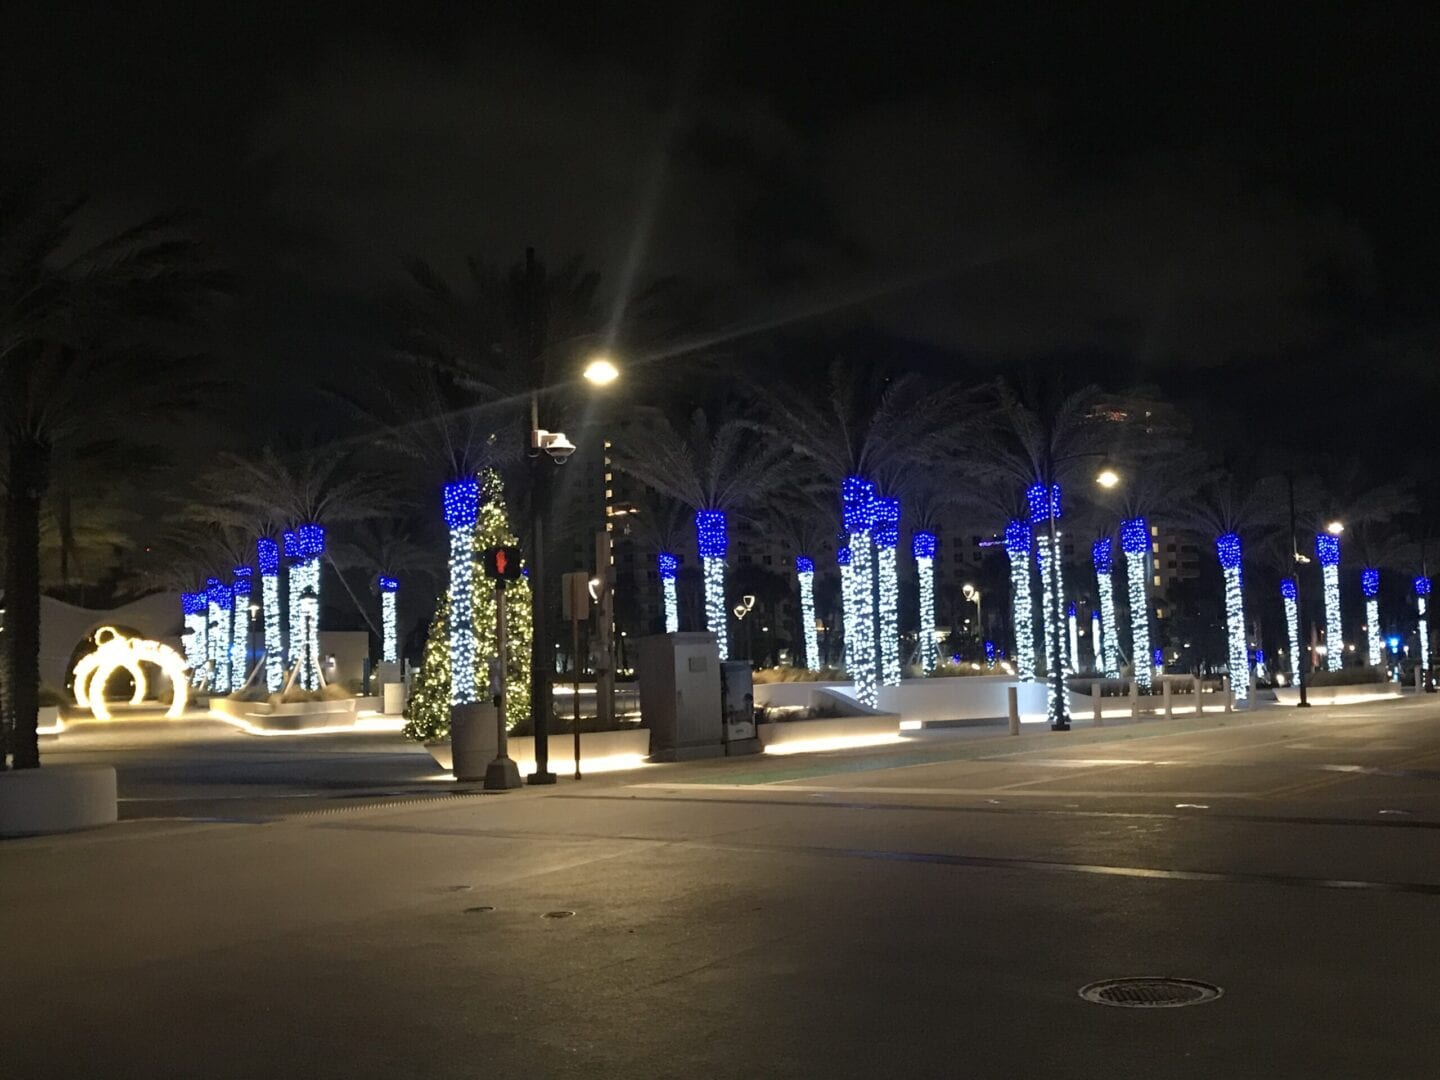 Rows of palm trees with white and blue lights at night